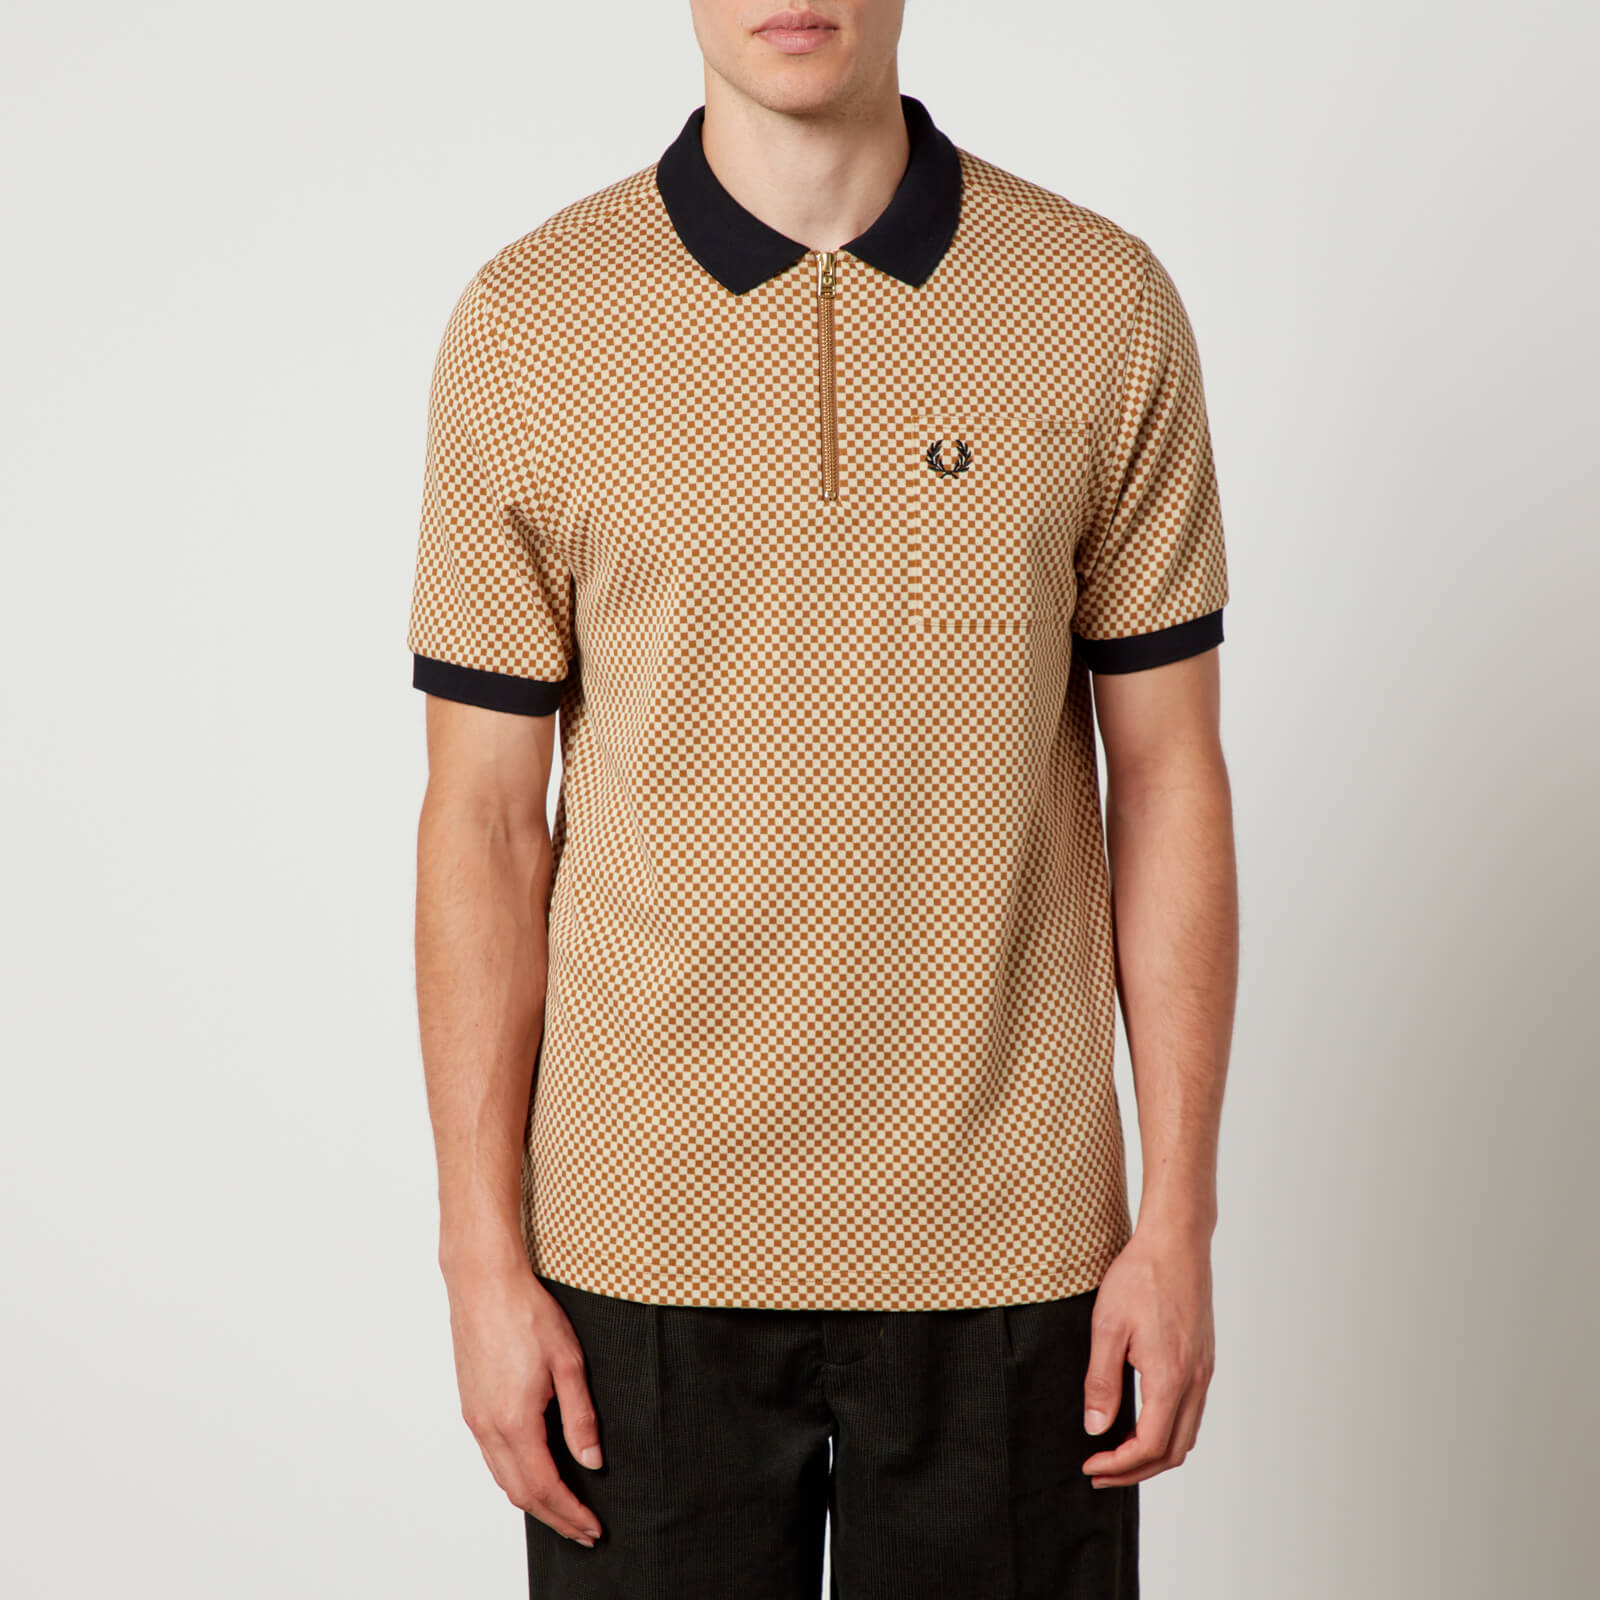 Fred Perry Men's Micro Chequerboard Polo Shirt - Oatmeal/Dark Caramel - L